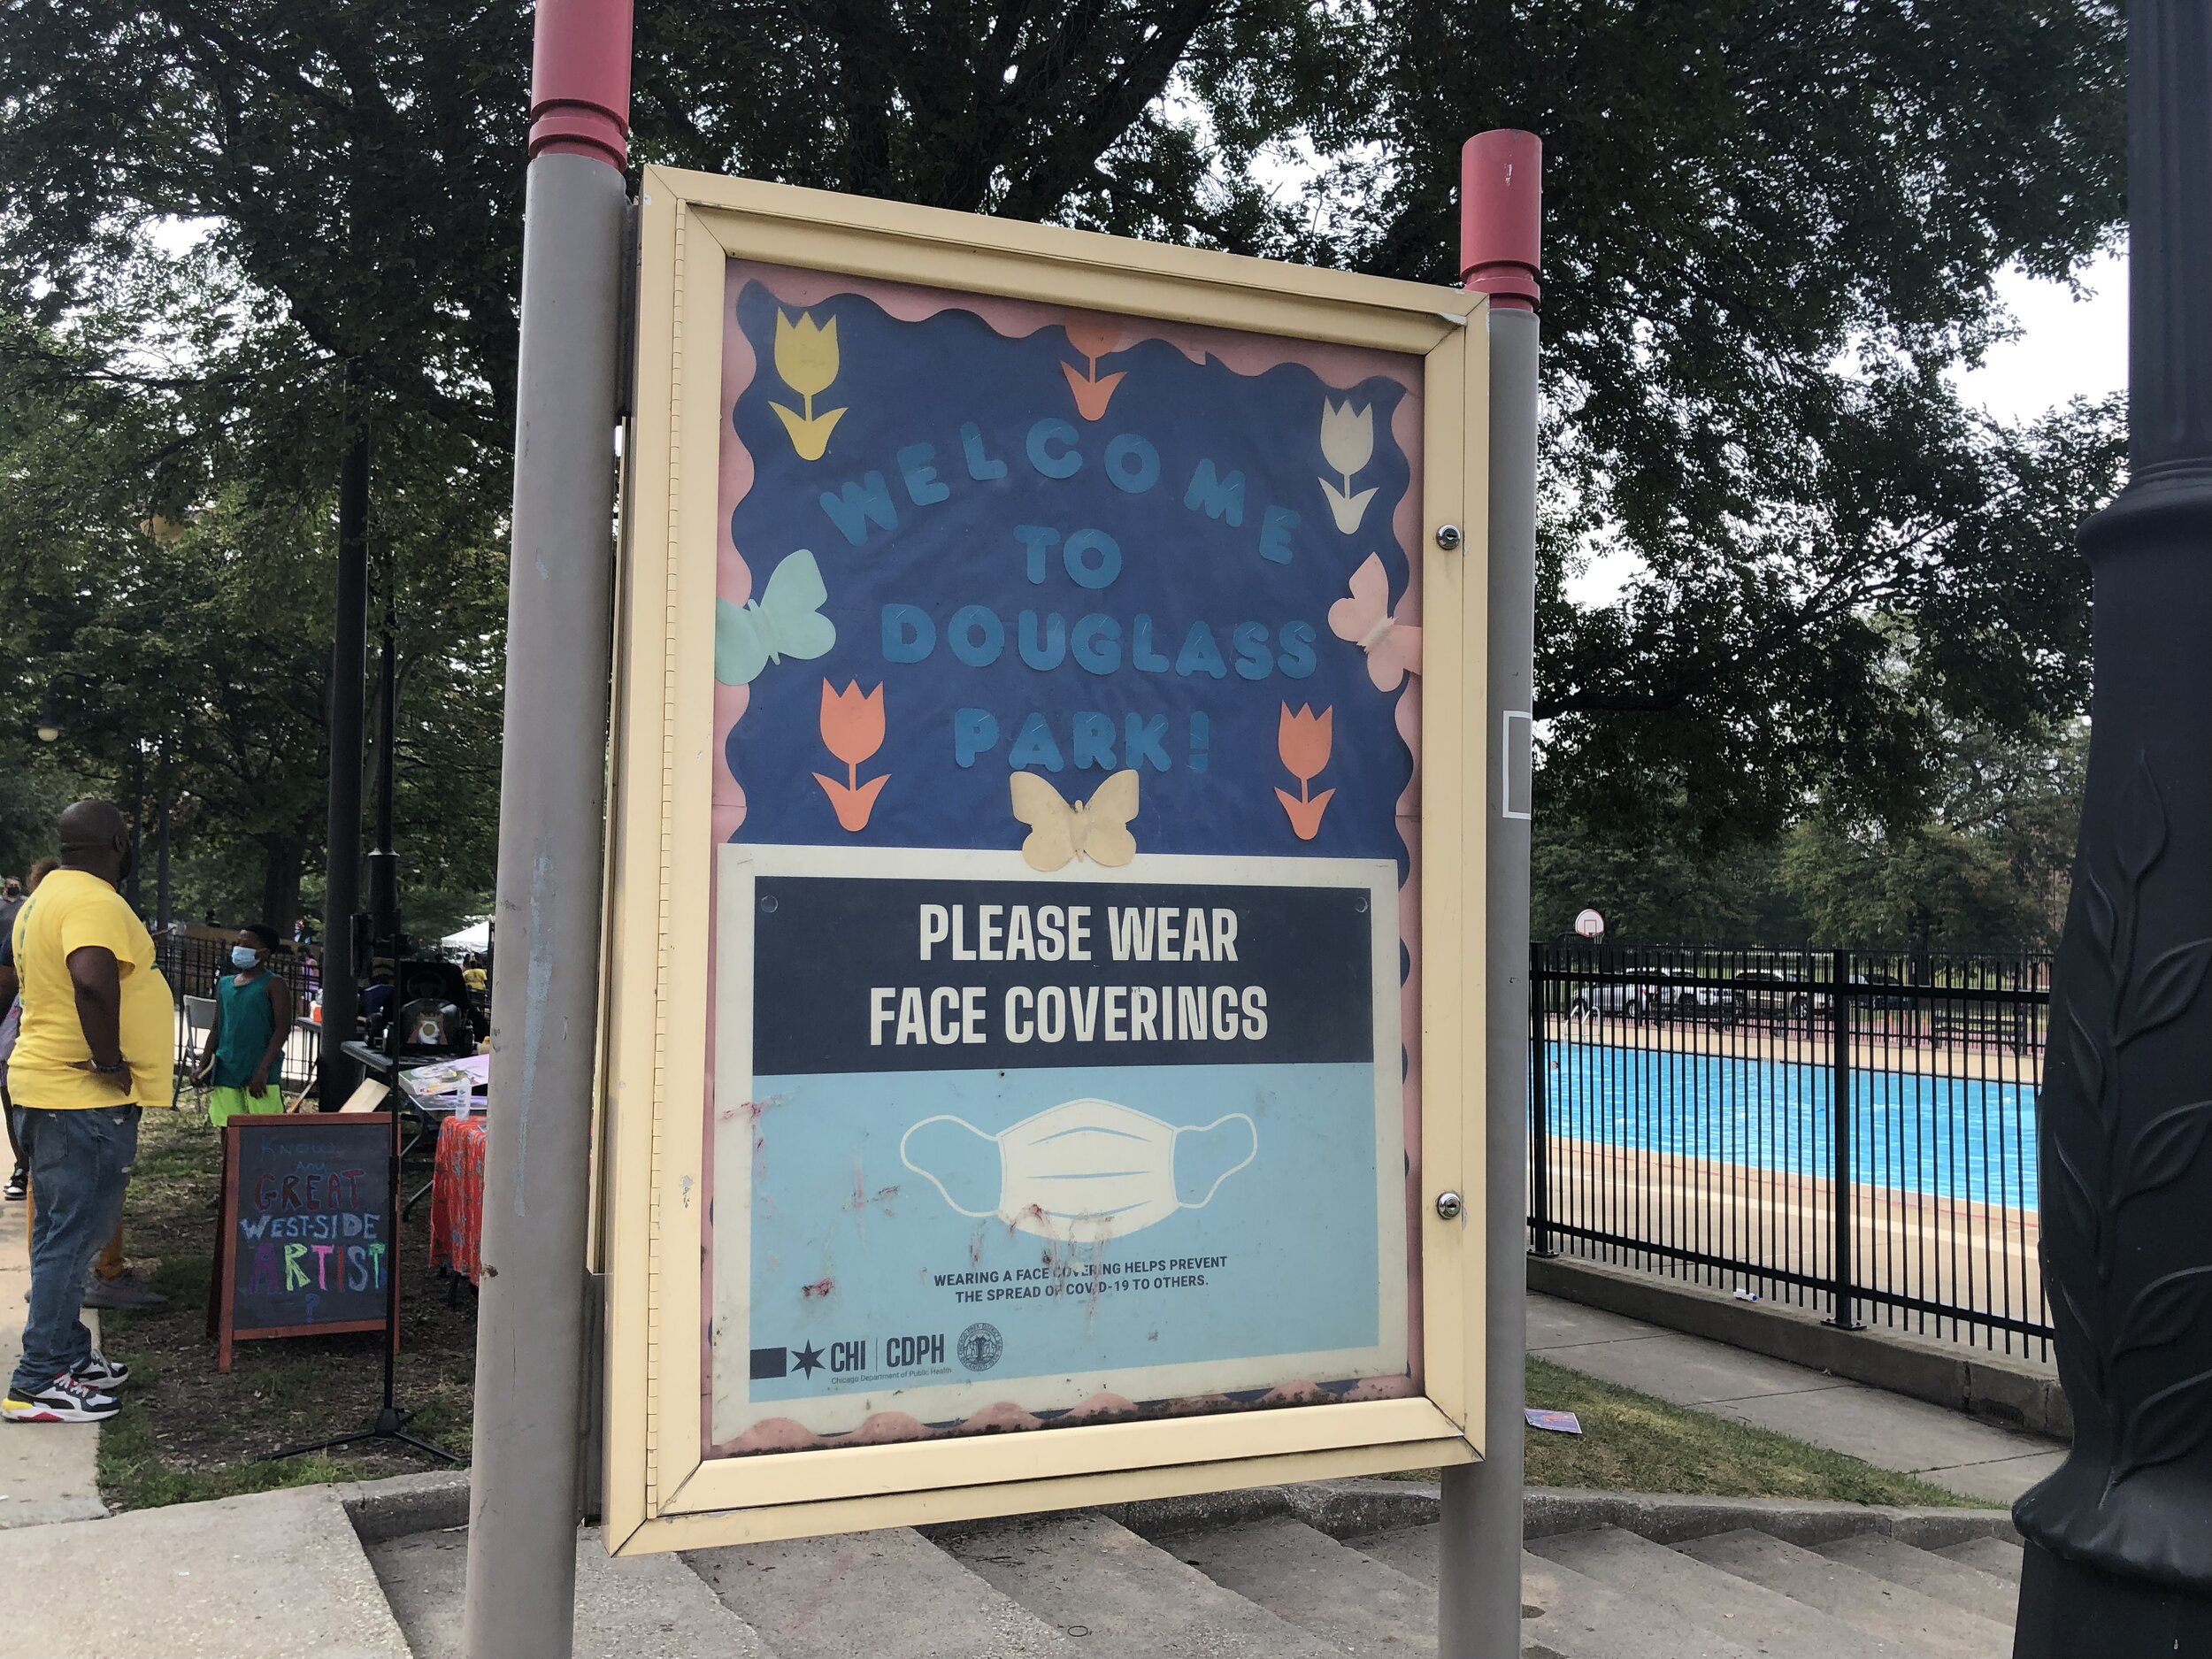 Douglass park sign reminding festival-goers to wear their face coverings.